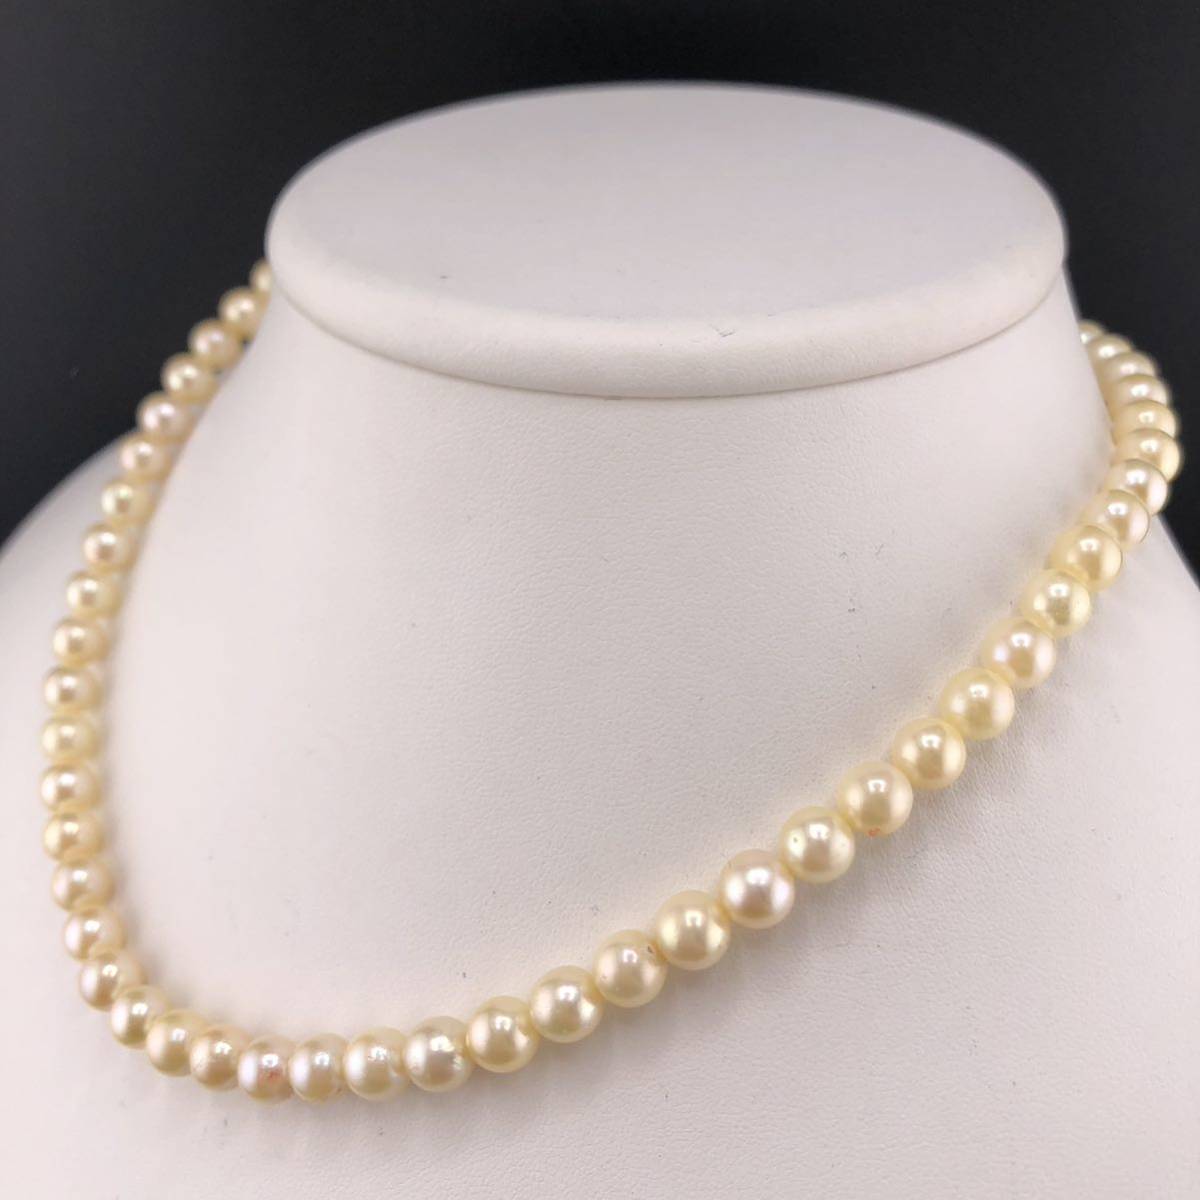 E02-4015☆☆アコヤパールネックレス 6.5mm~7.0mm 40cm 30g ( アコヤ真珠 Pearl necklace SILVER )_画像2